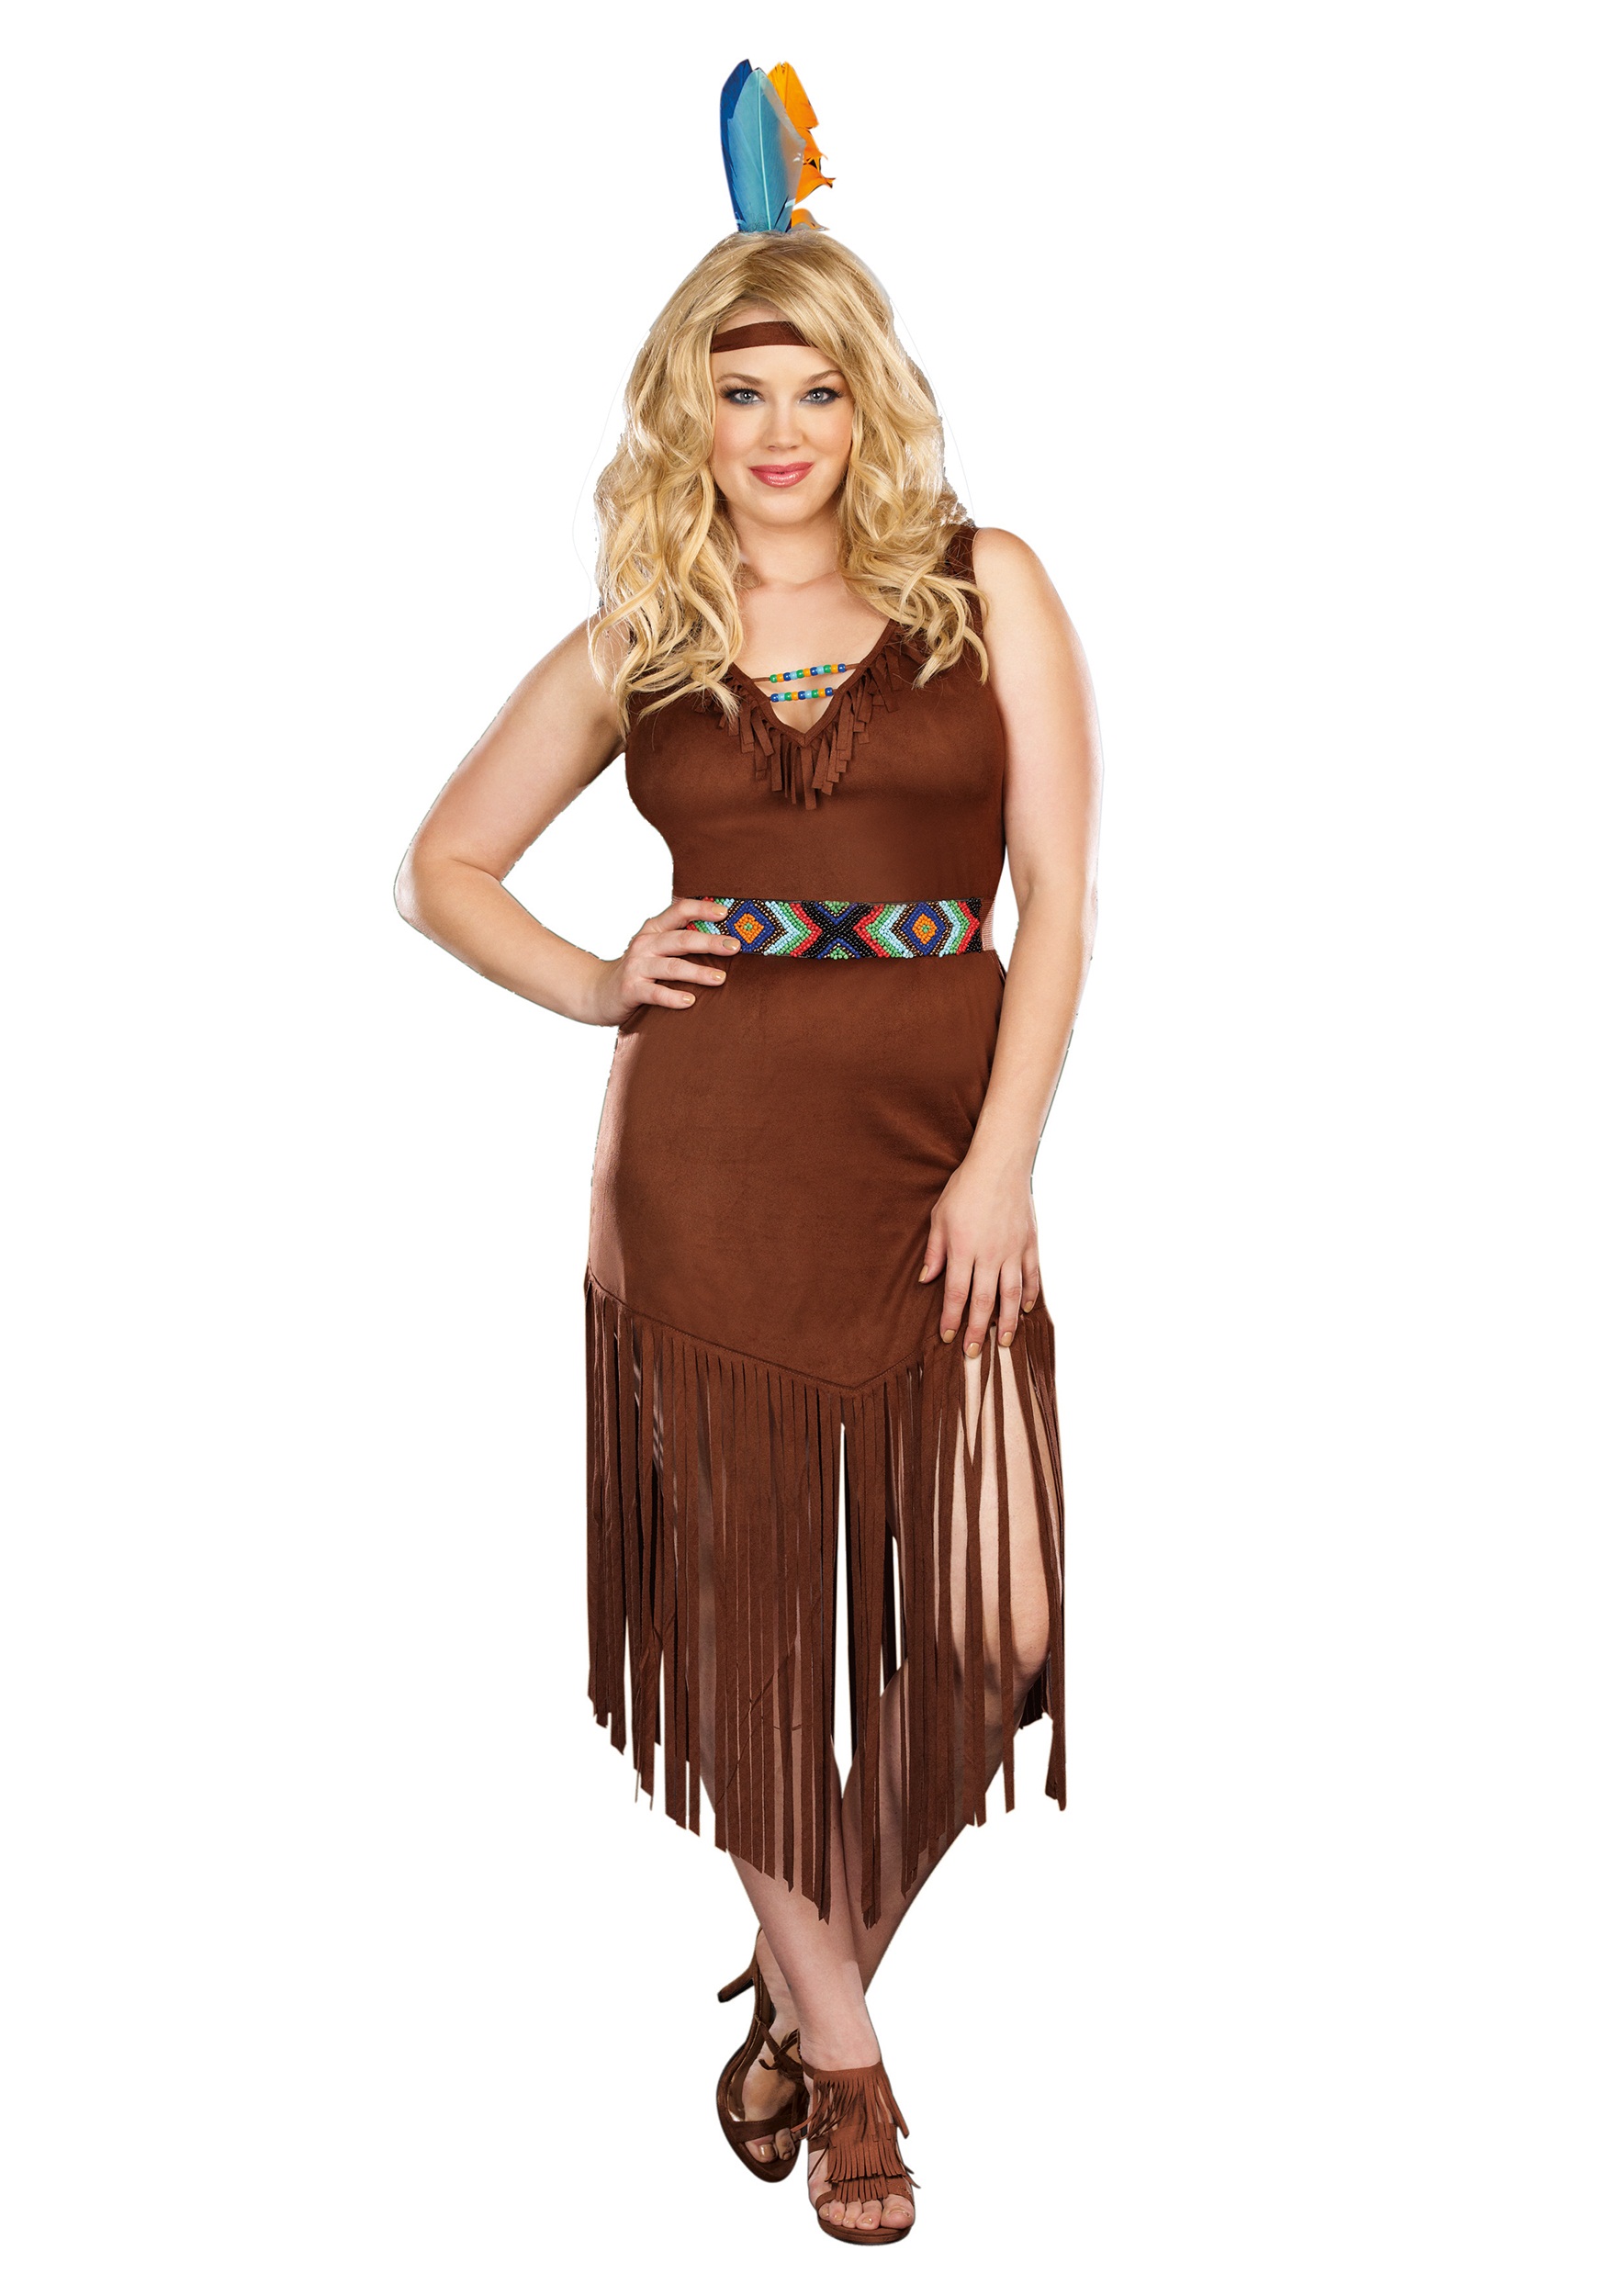 Plus Size Mystic Indian Maiden Costume with Free Shipping in U.S., UK, Euro...